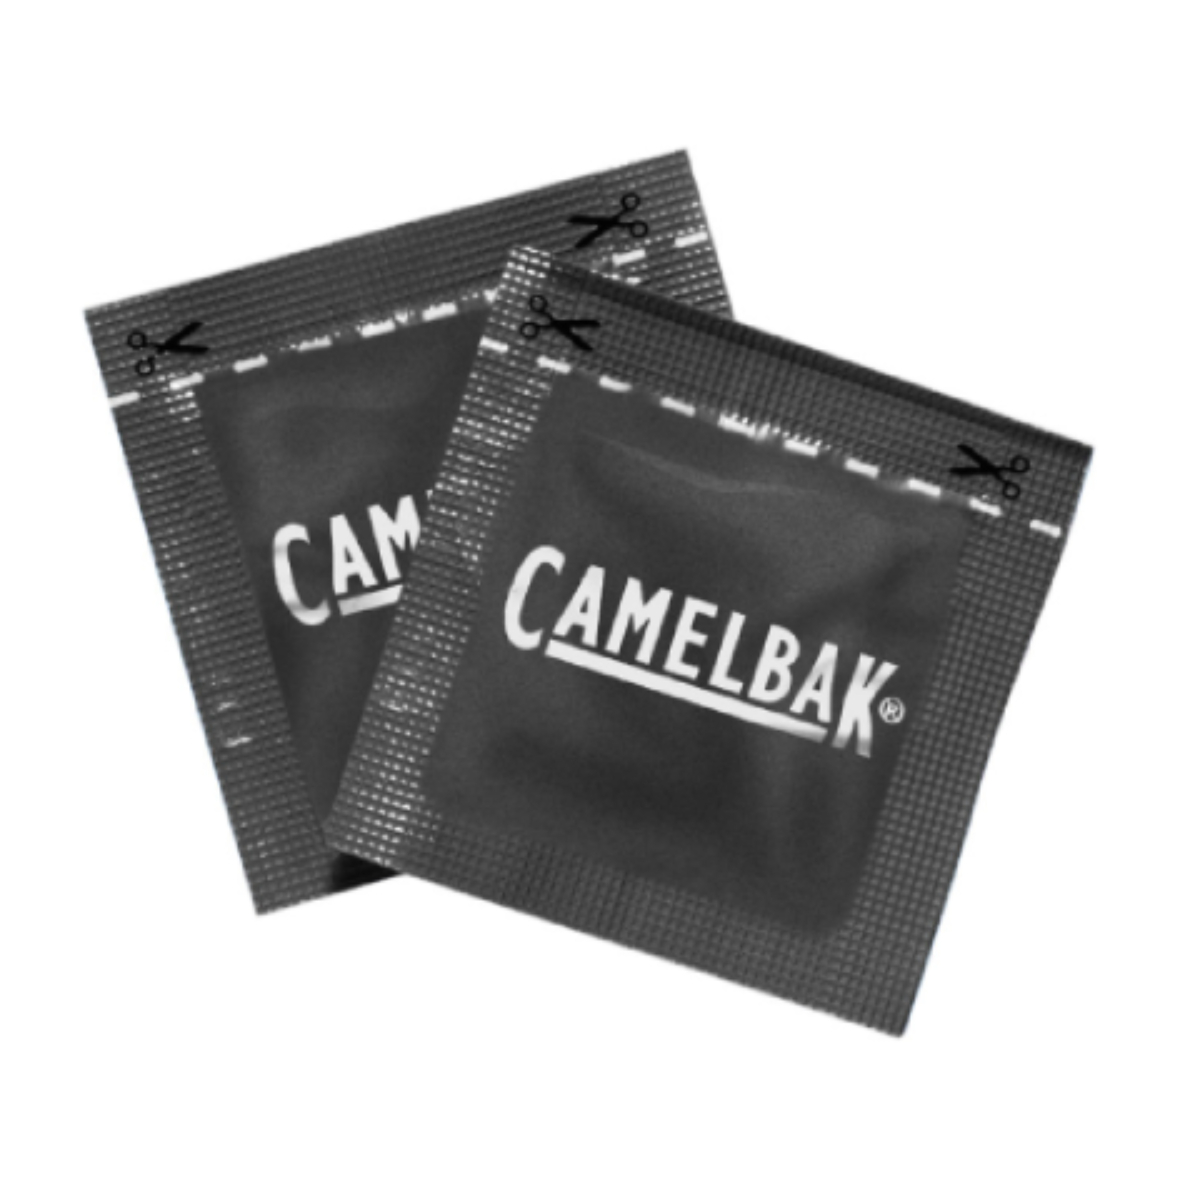 CAMELBAK CLEANING TABLETS (8 PACK)